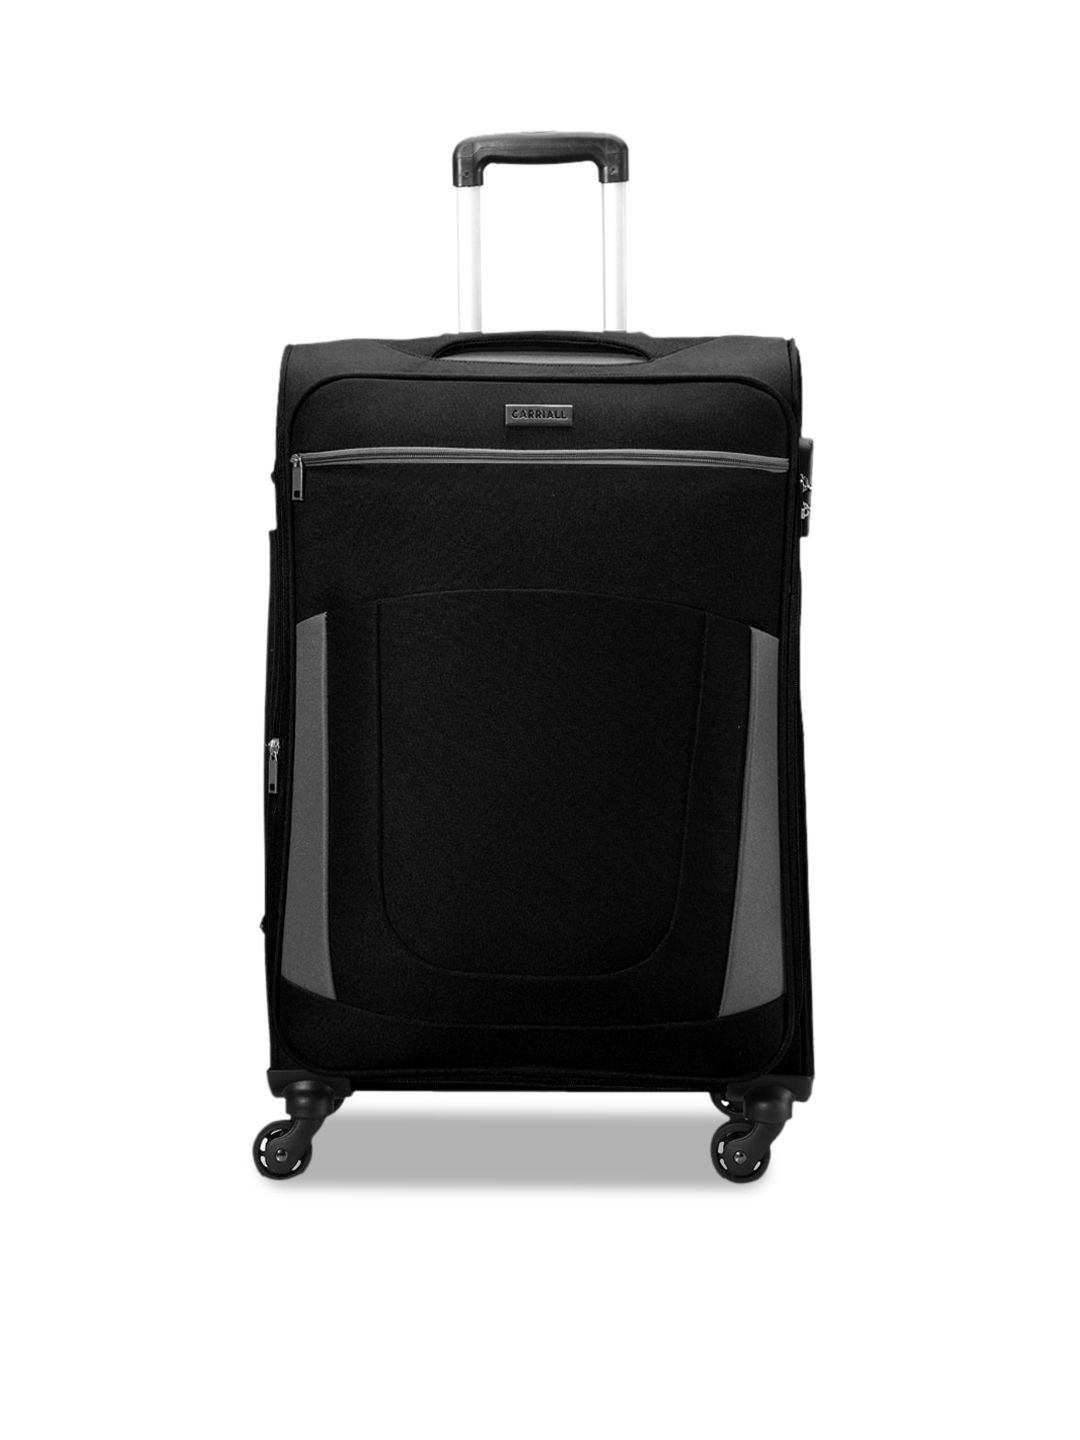 CARRIALL Black & Grey Solid Soft-Sided Trolley Suitcase Price in India